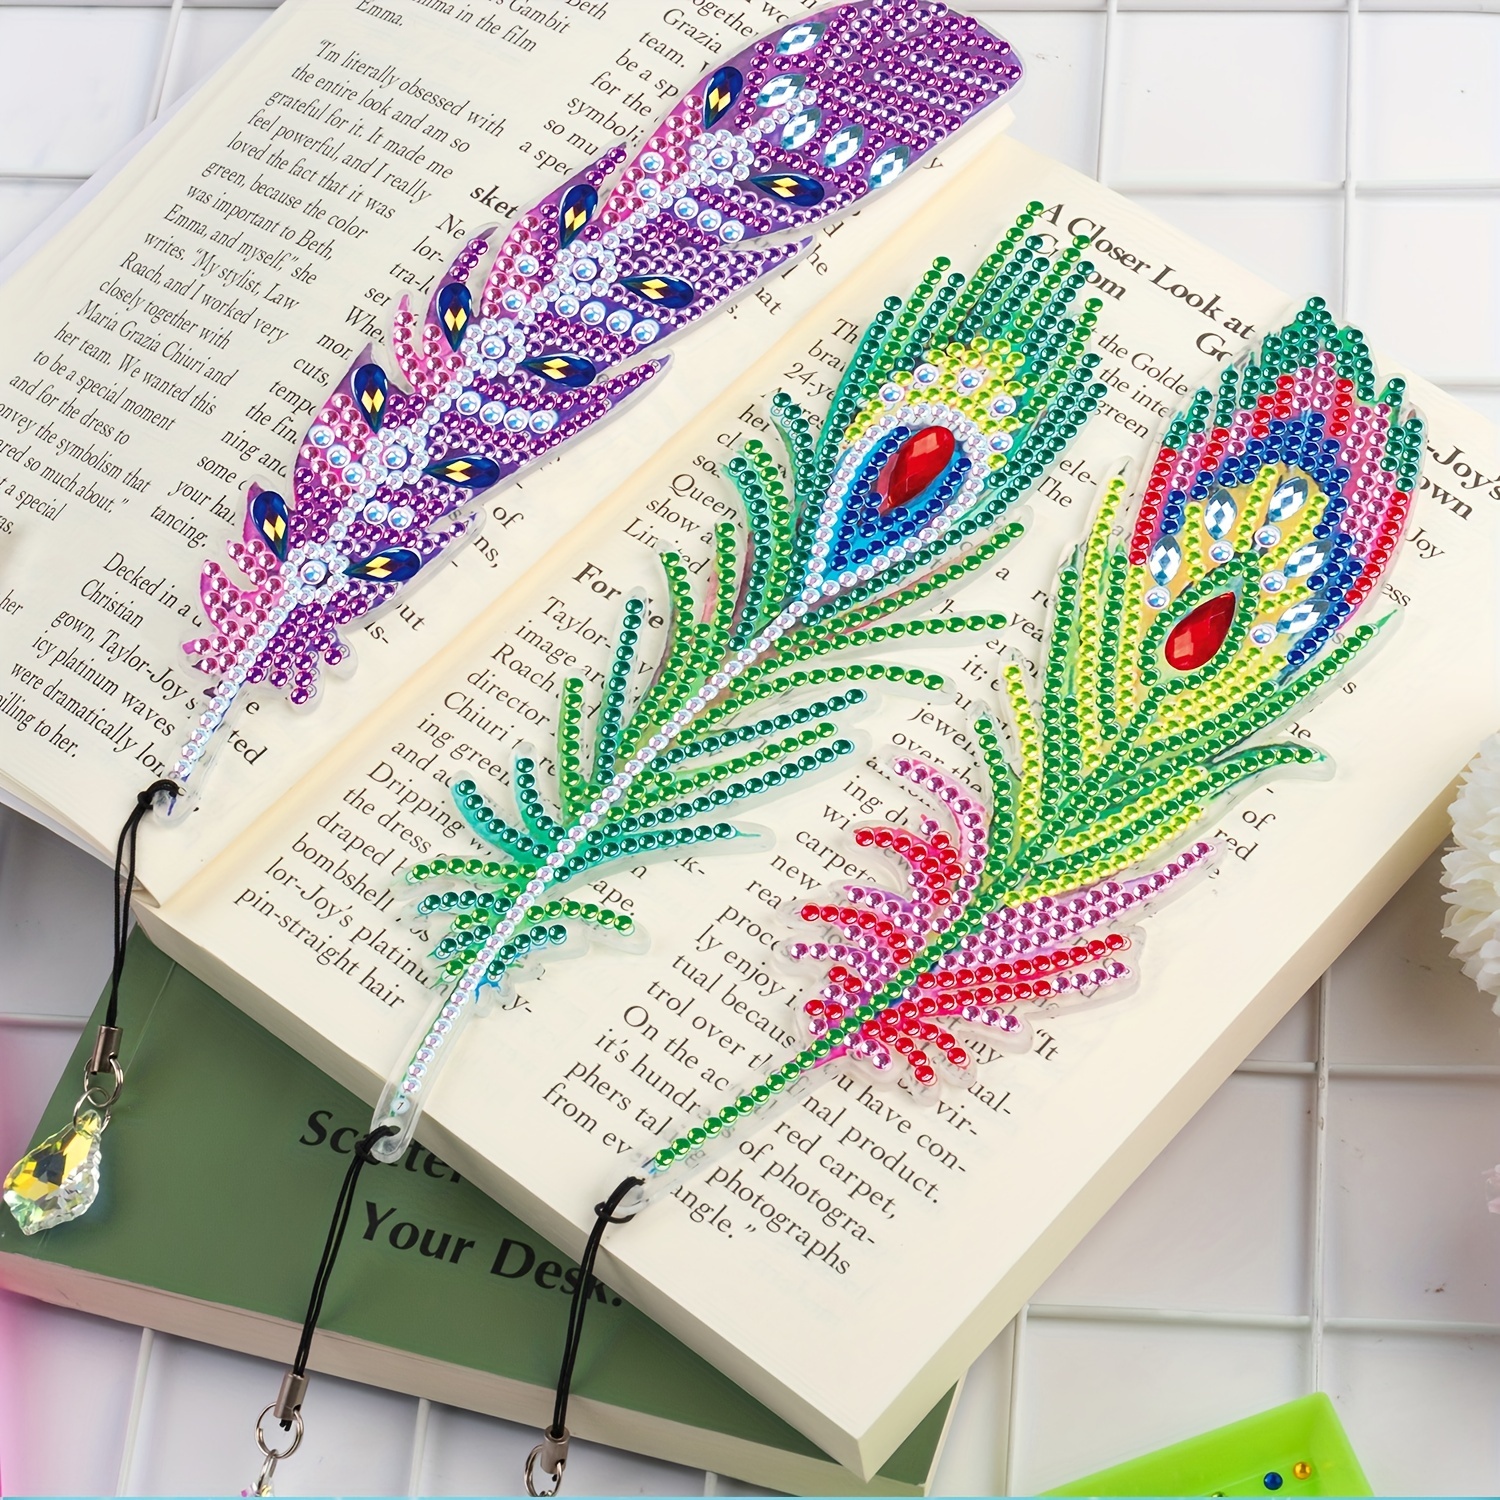 12 Pcs 5D Diamond Painting Bookmarks Kit DIY Feather Rhinestones Bookmark  for Kids Adults PVC Art Bookmarks with Crystal Pendant for Home Office